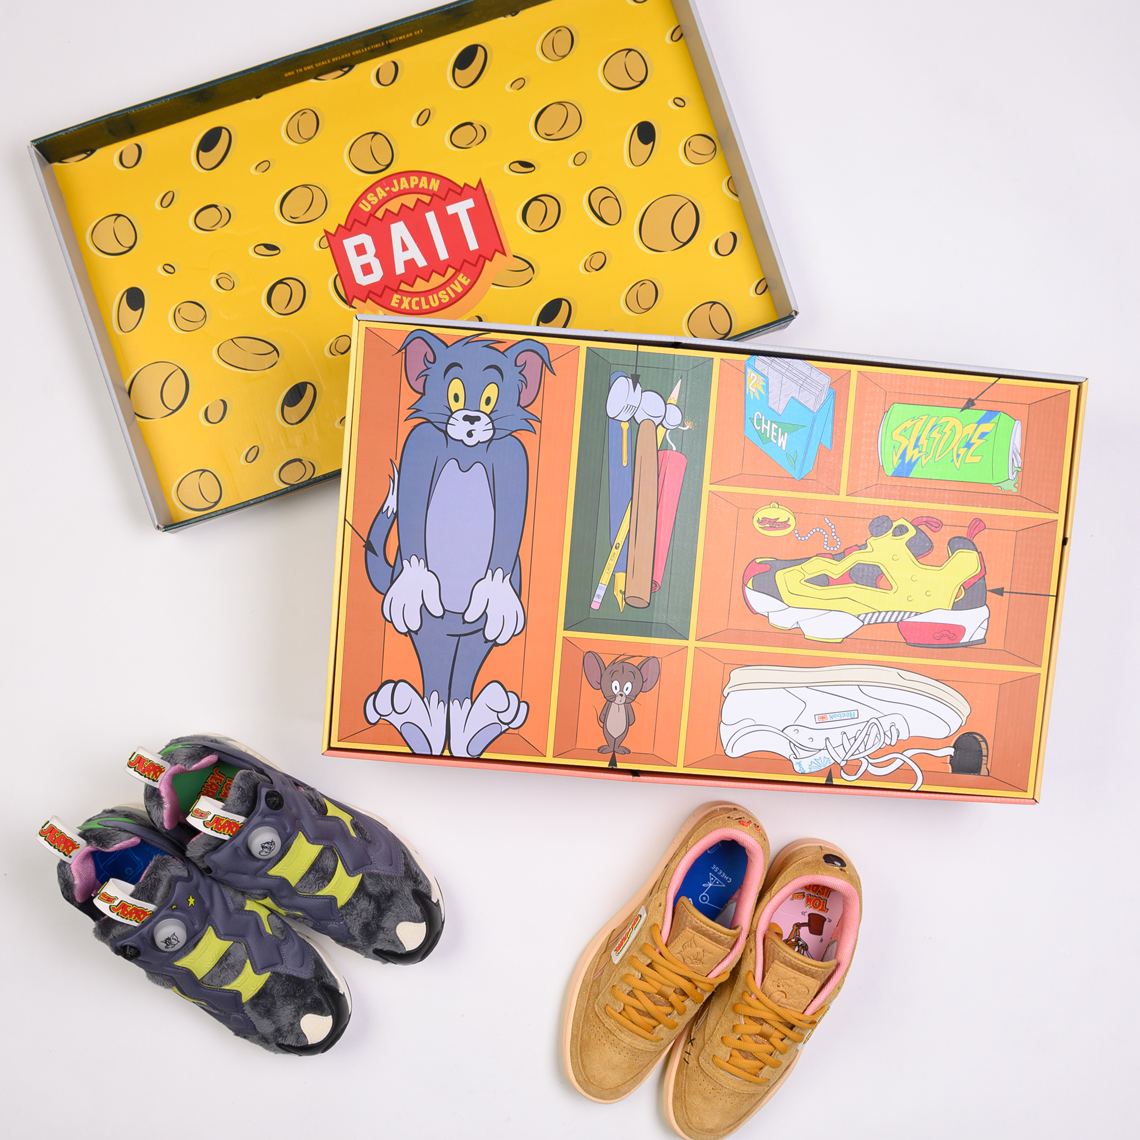 Bait classic Reebok Tom Jerry Special Edition 1